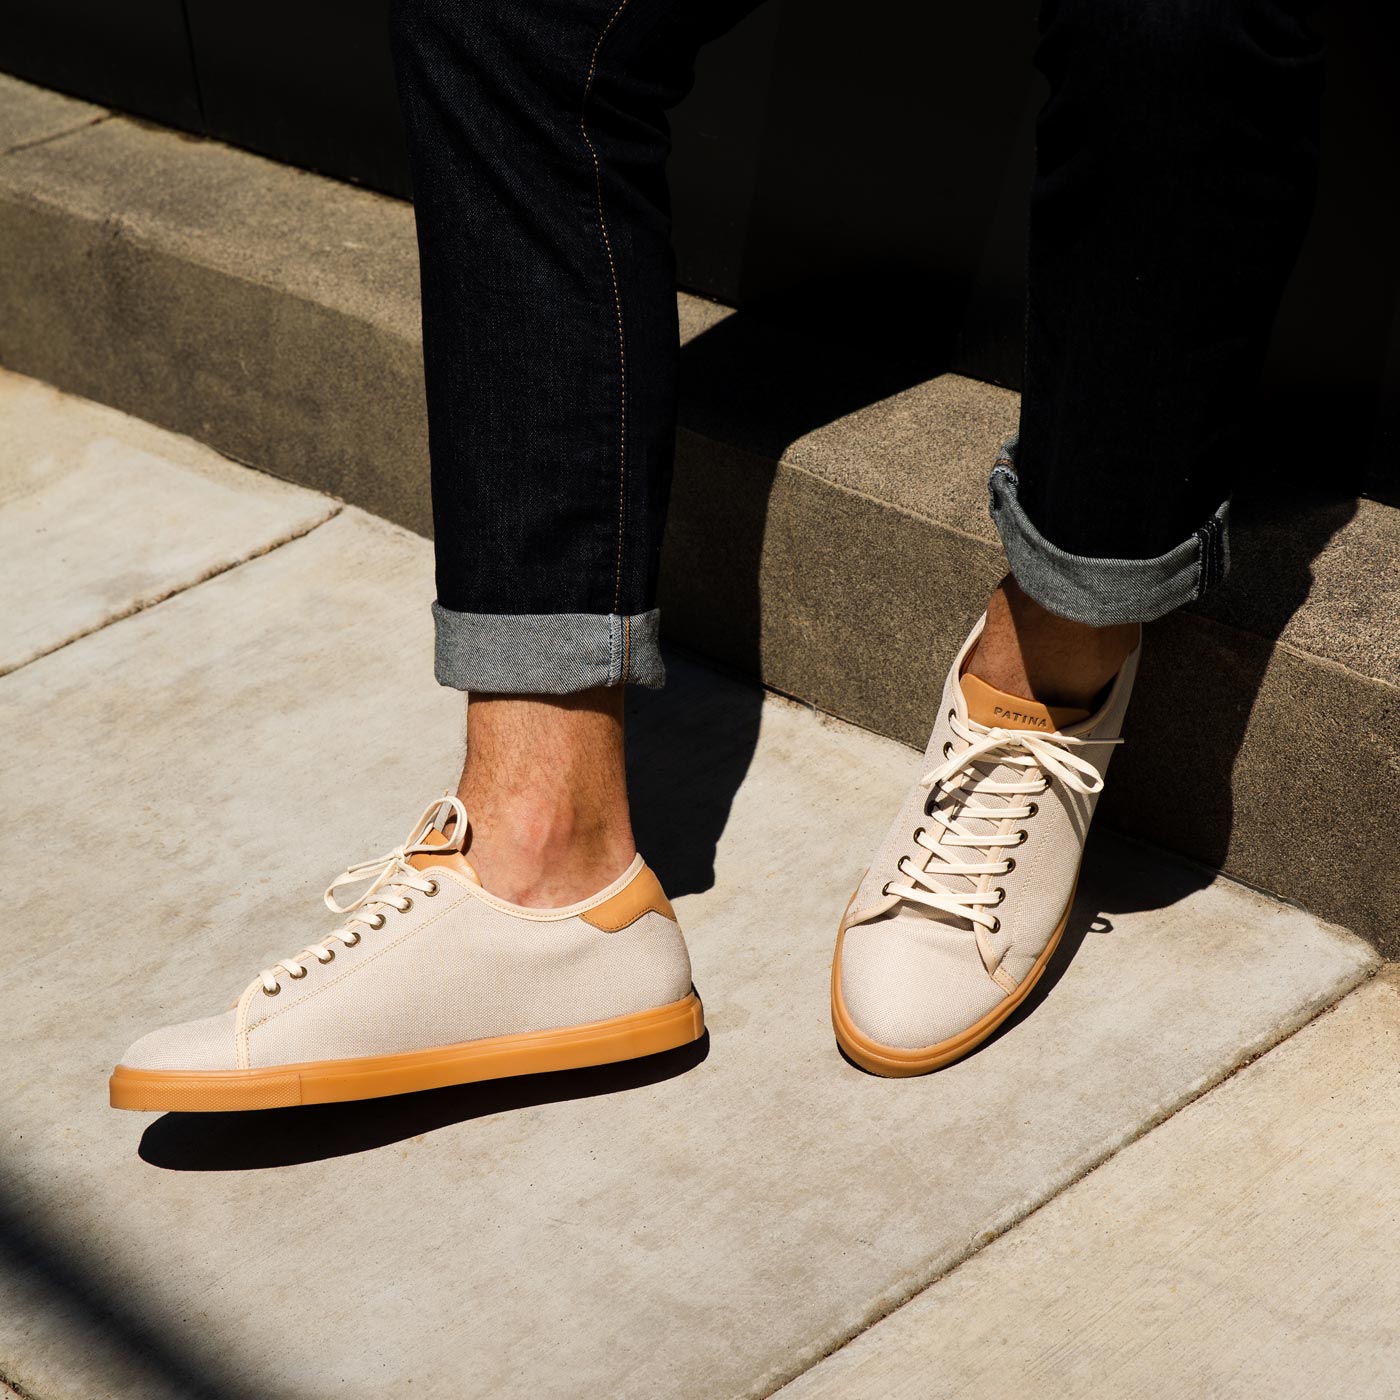 Gum Sole Sneakers: Our 22 Handsome Picks How To Wear Them, 51% OFF